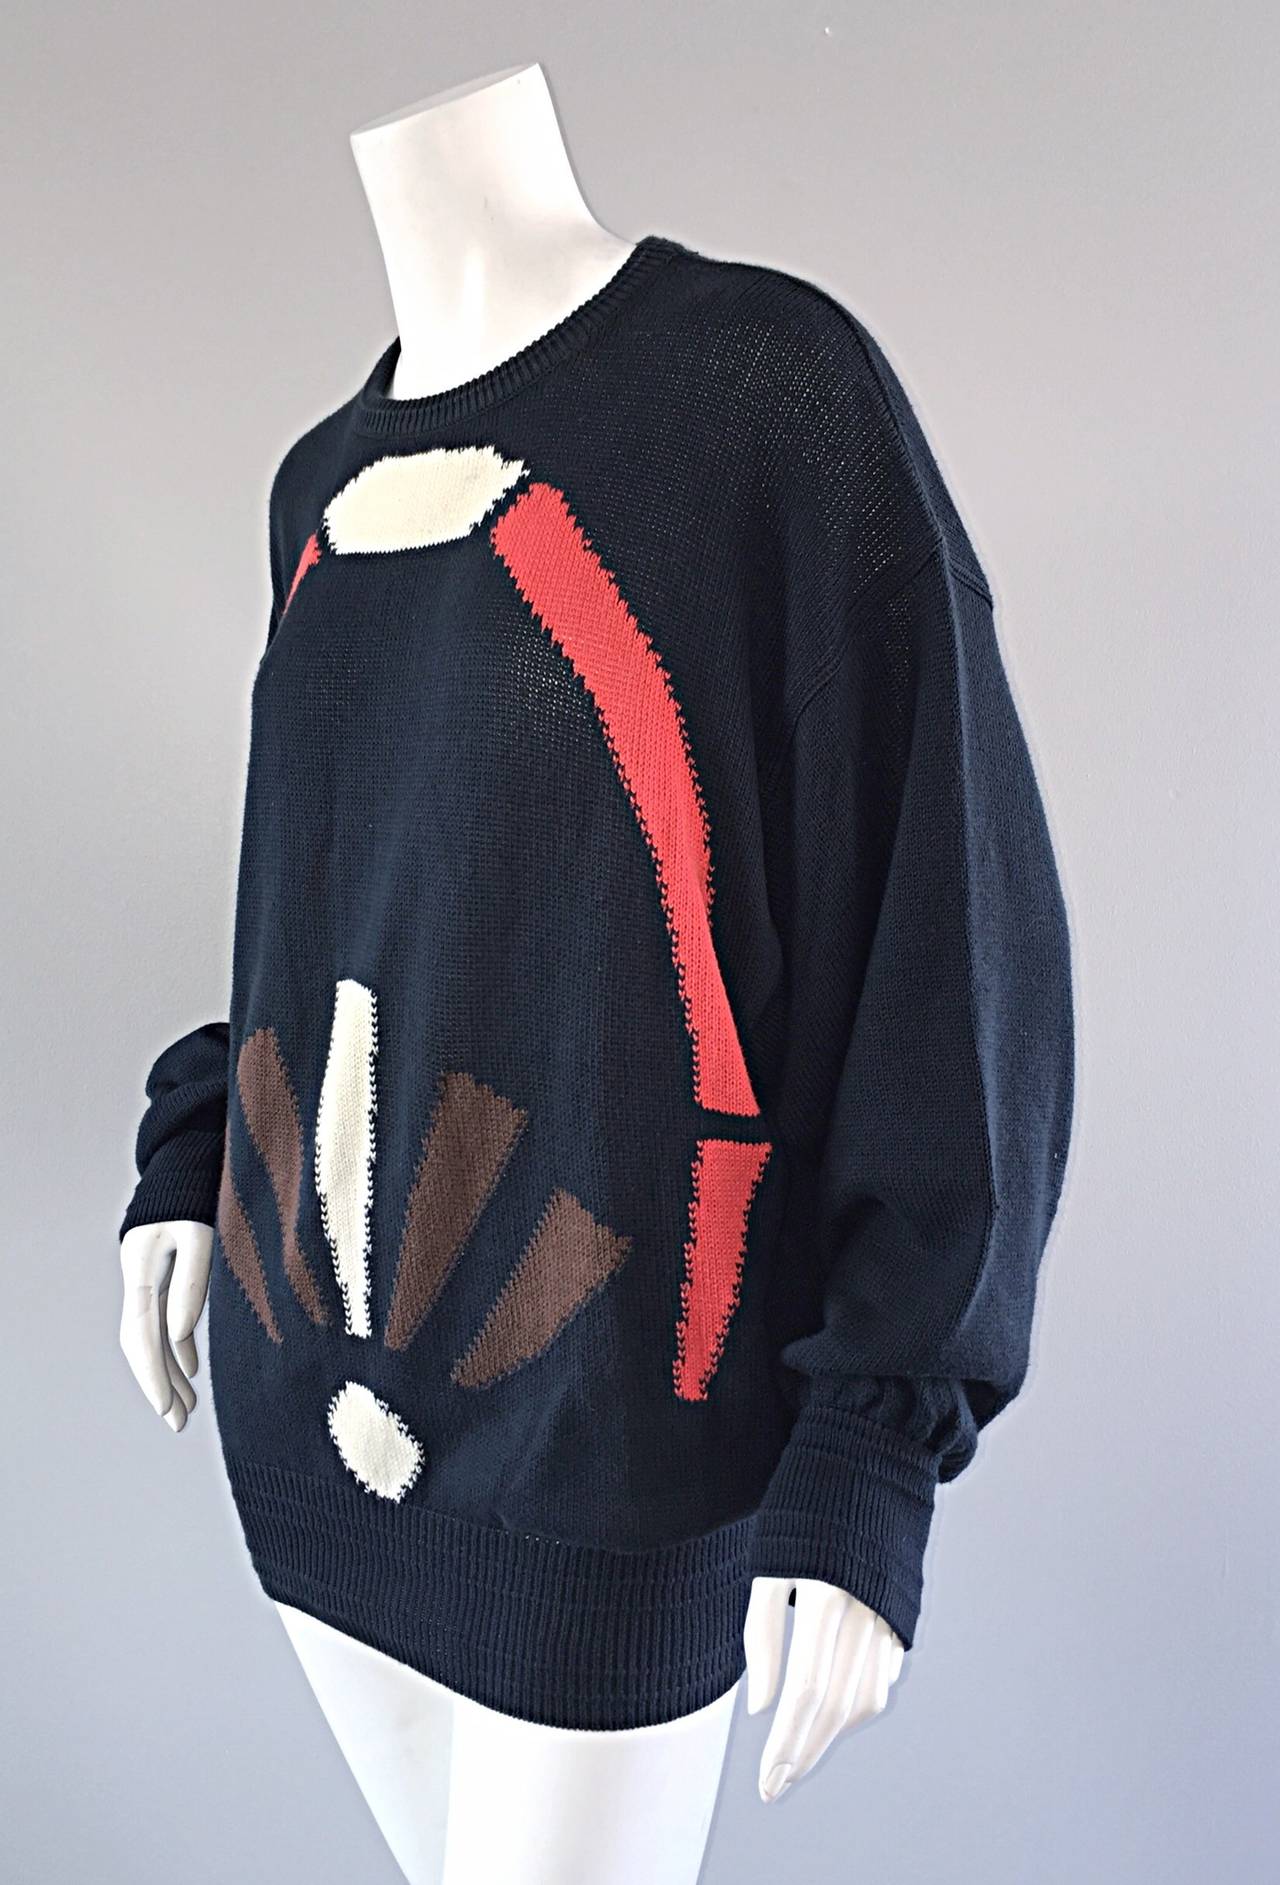 Very Rare Early Gianni Versace Intarsia Navy Blue Vintage 1980s Sweater ...